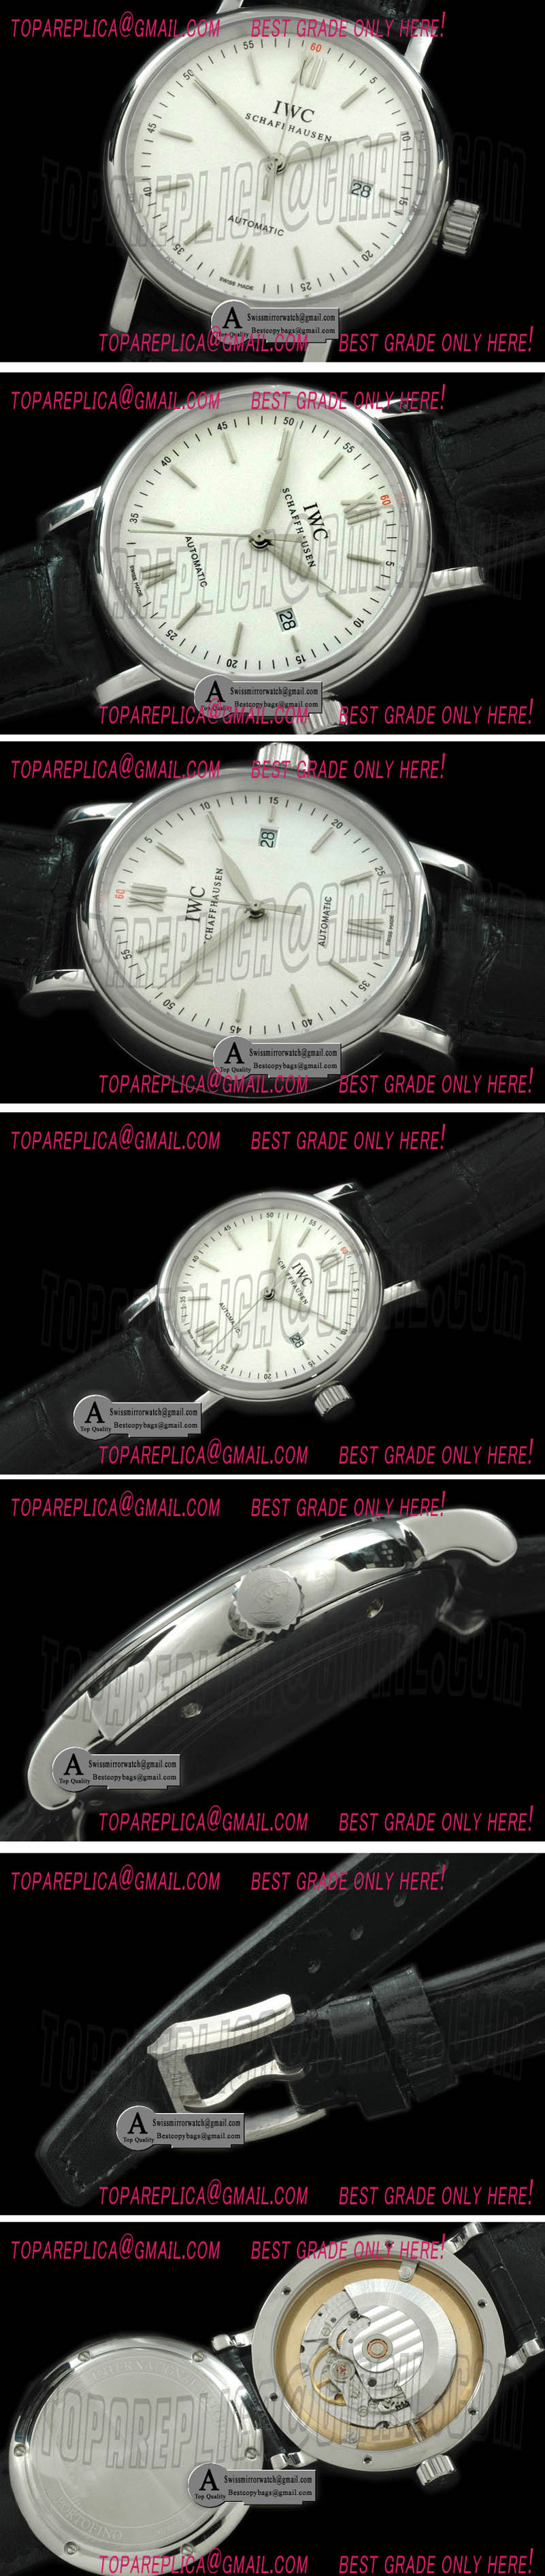 IWC Portifino Automatic SS/Leather White Asia 2824 Replica Watches